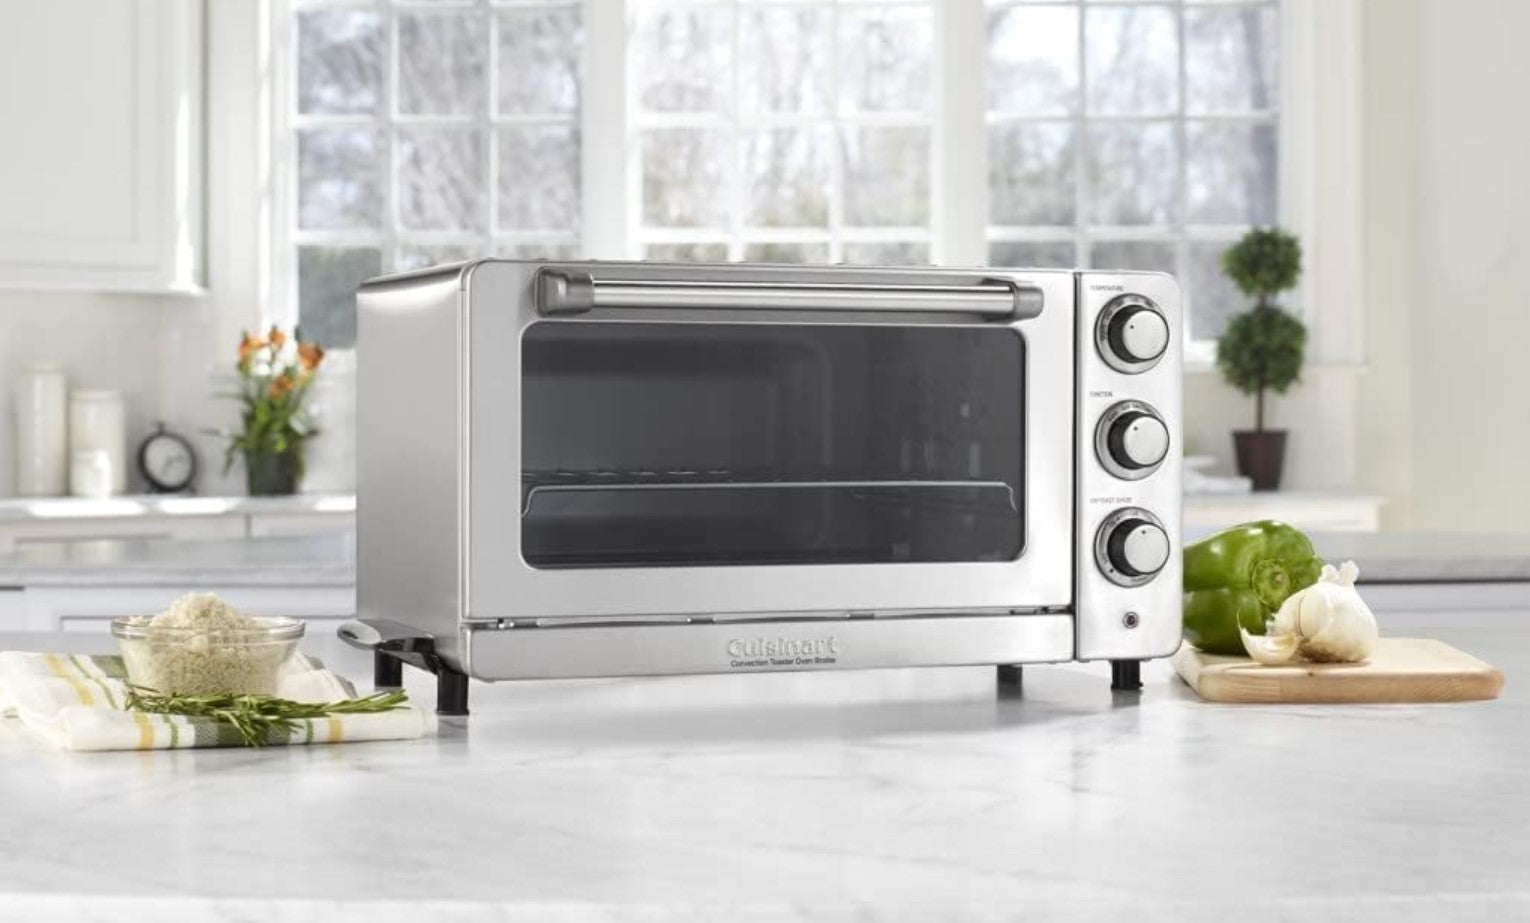 Cuisinart TOB-60N1FR Convection Toaster Oven Broiler Silver - Certified Refurbished